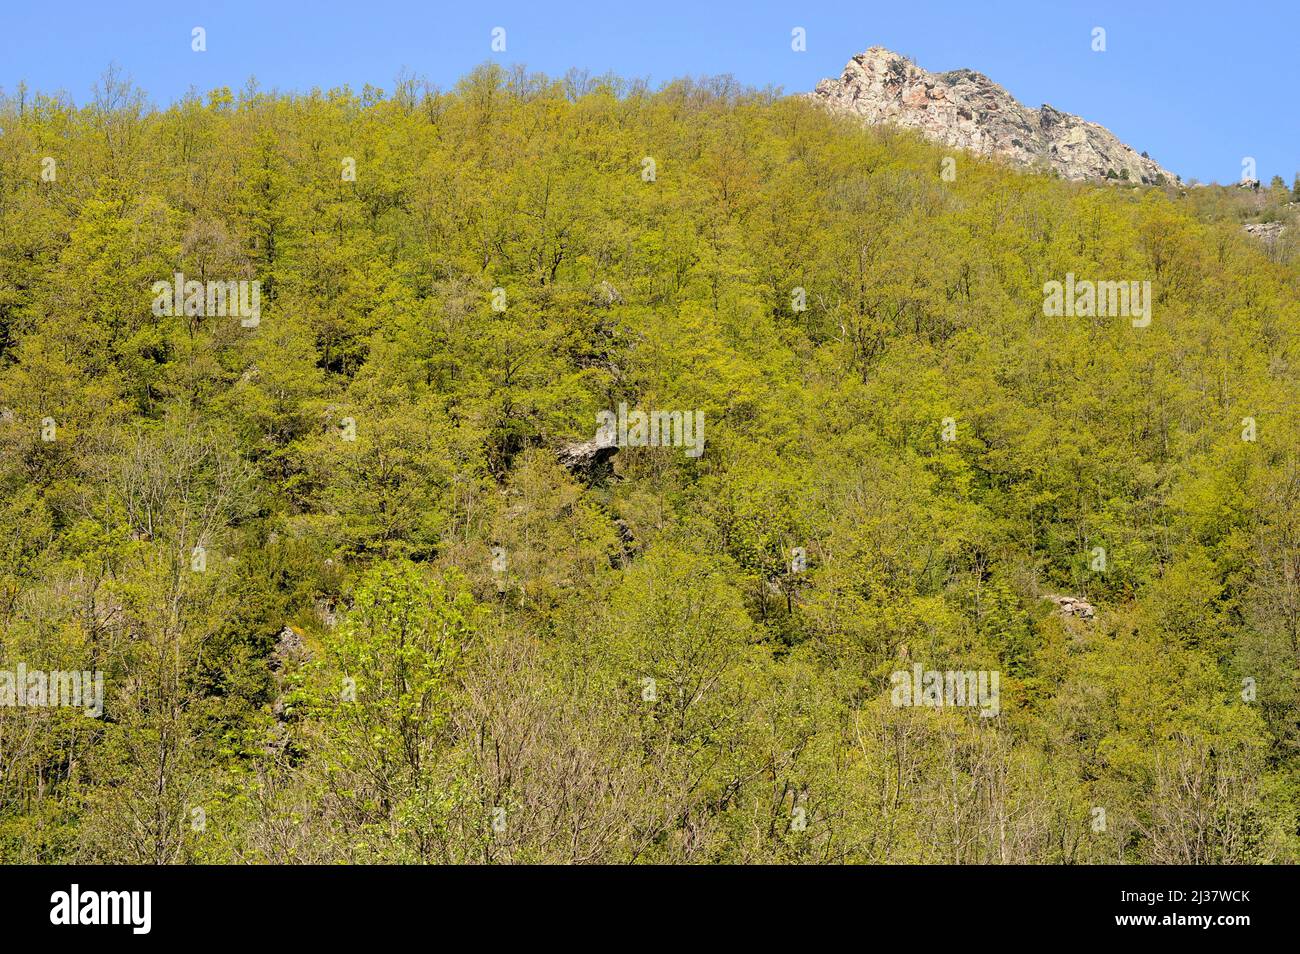 Pubescent oak or downy oak (Quercus humilis or Quercus pubescens) is a deciduous tree native to central and southern Europe and Asia Minor. This Stock Photo